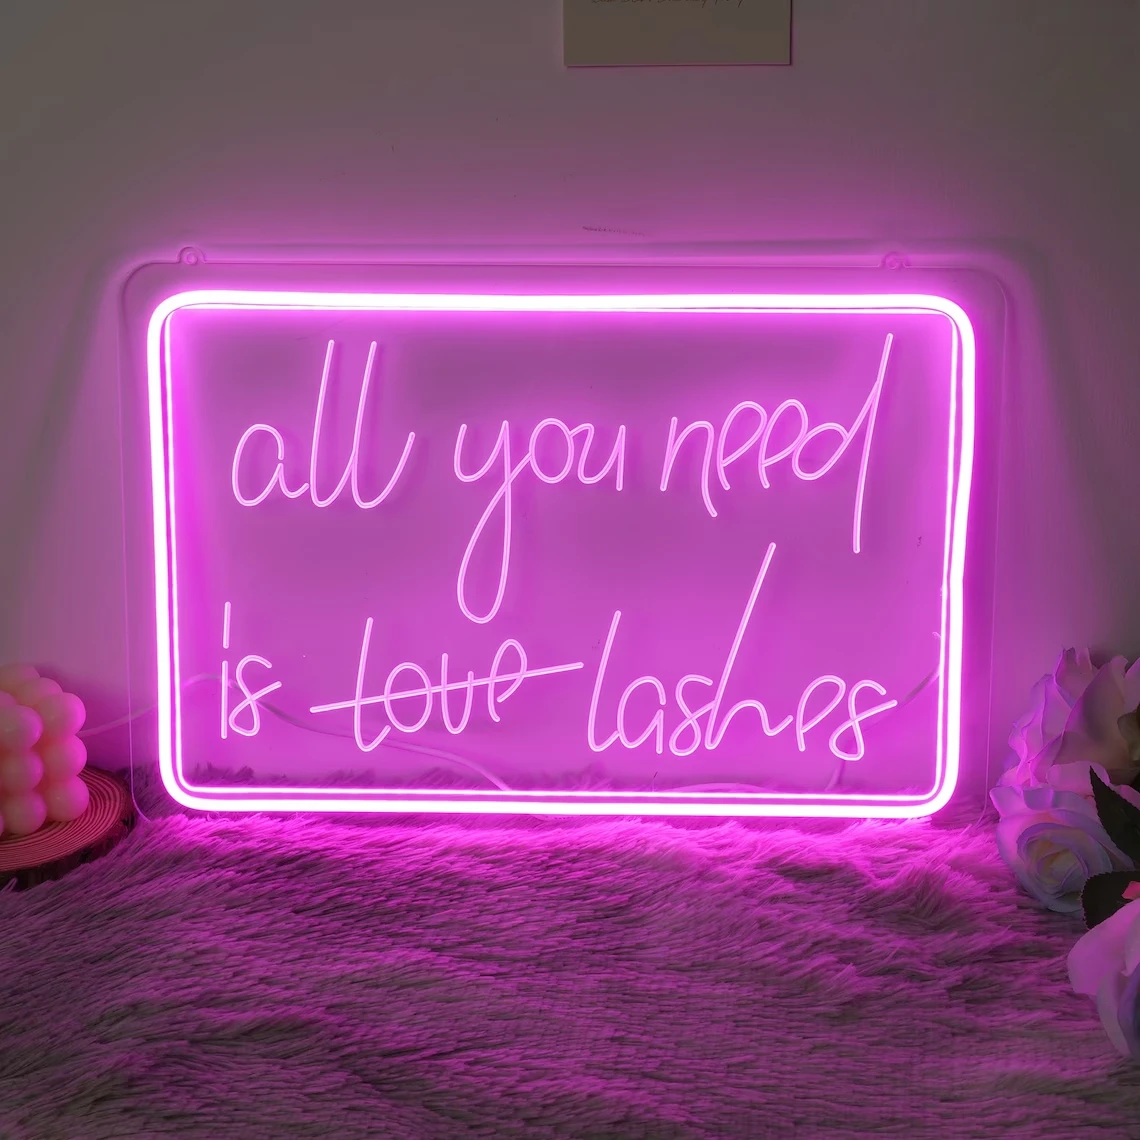 

All You Need is Love Lashes | Neon Sign | LED Engraving Neon Light | Custom Neon Signs | Home Room Wall Decoration